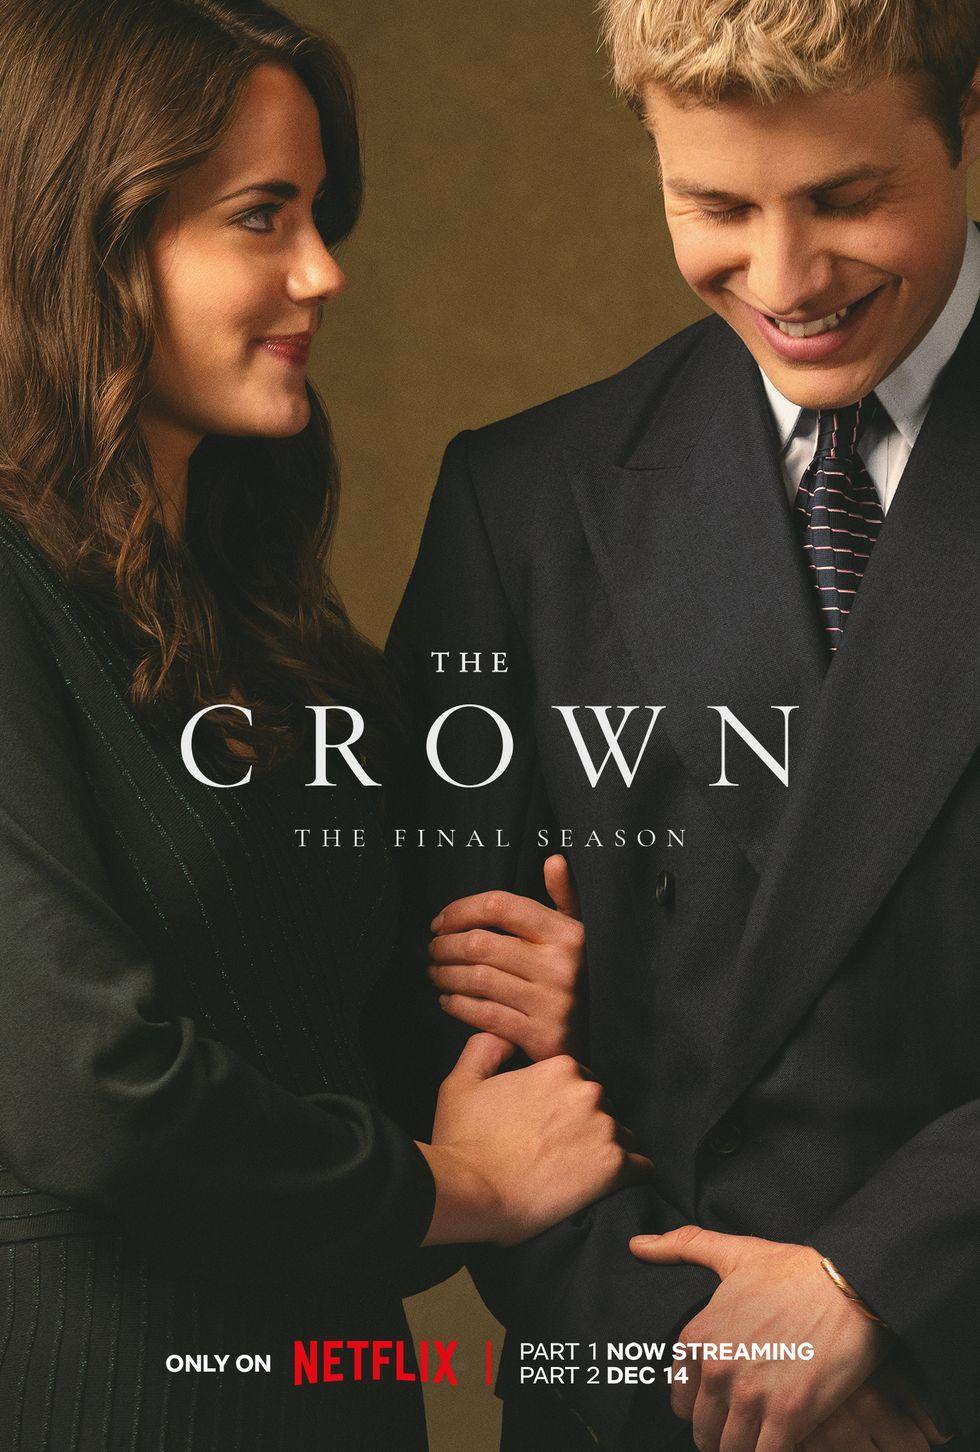 The Crown season 6 part 2 (December 14) - Streaming on NetflixThe final six episodes of 